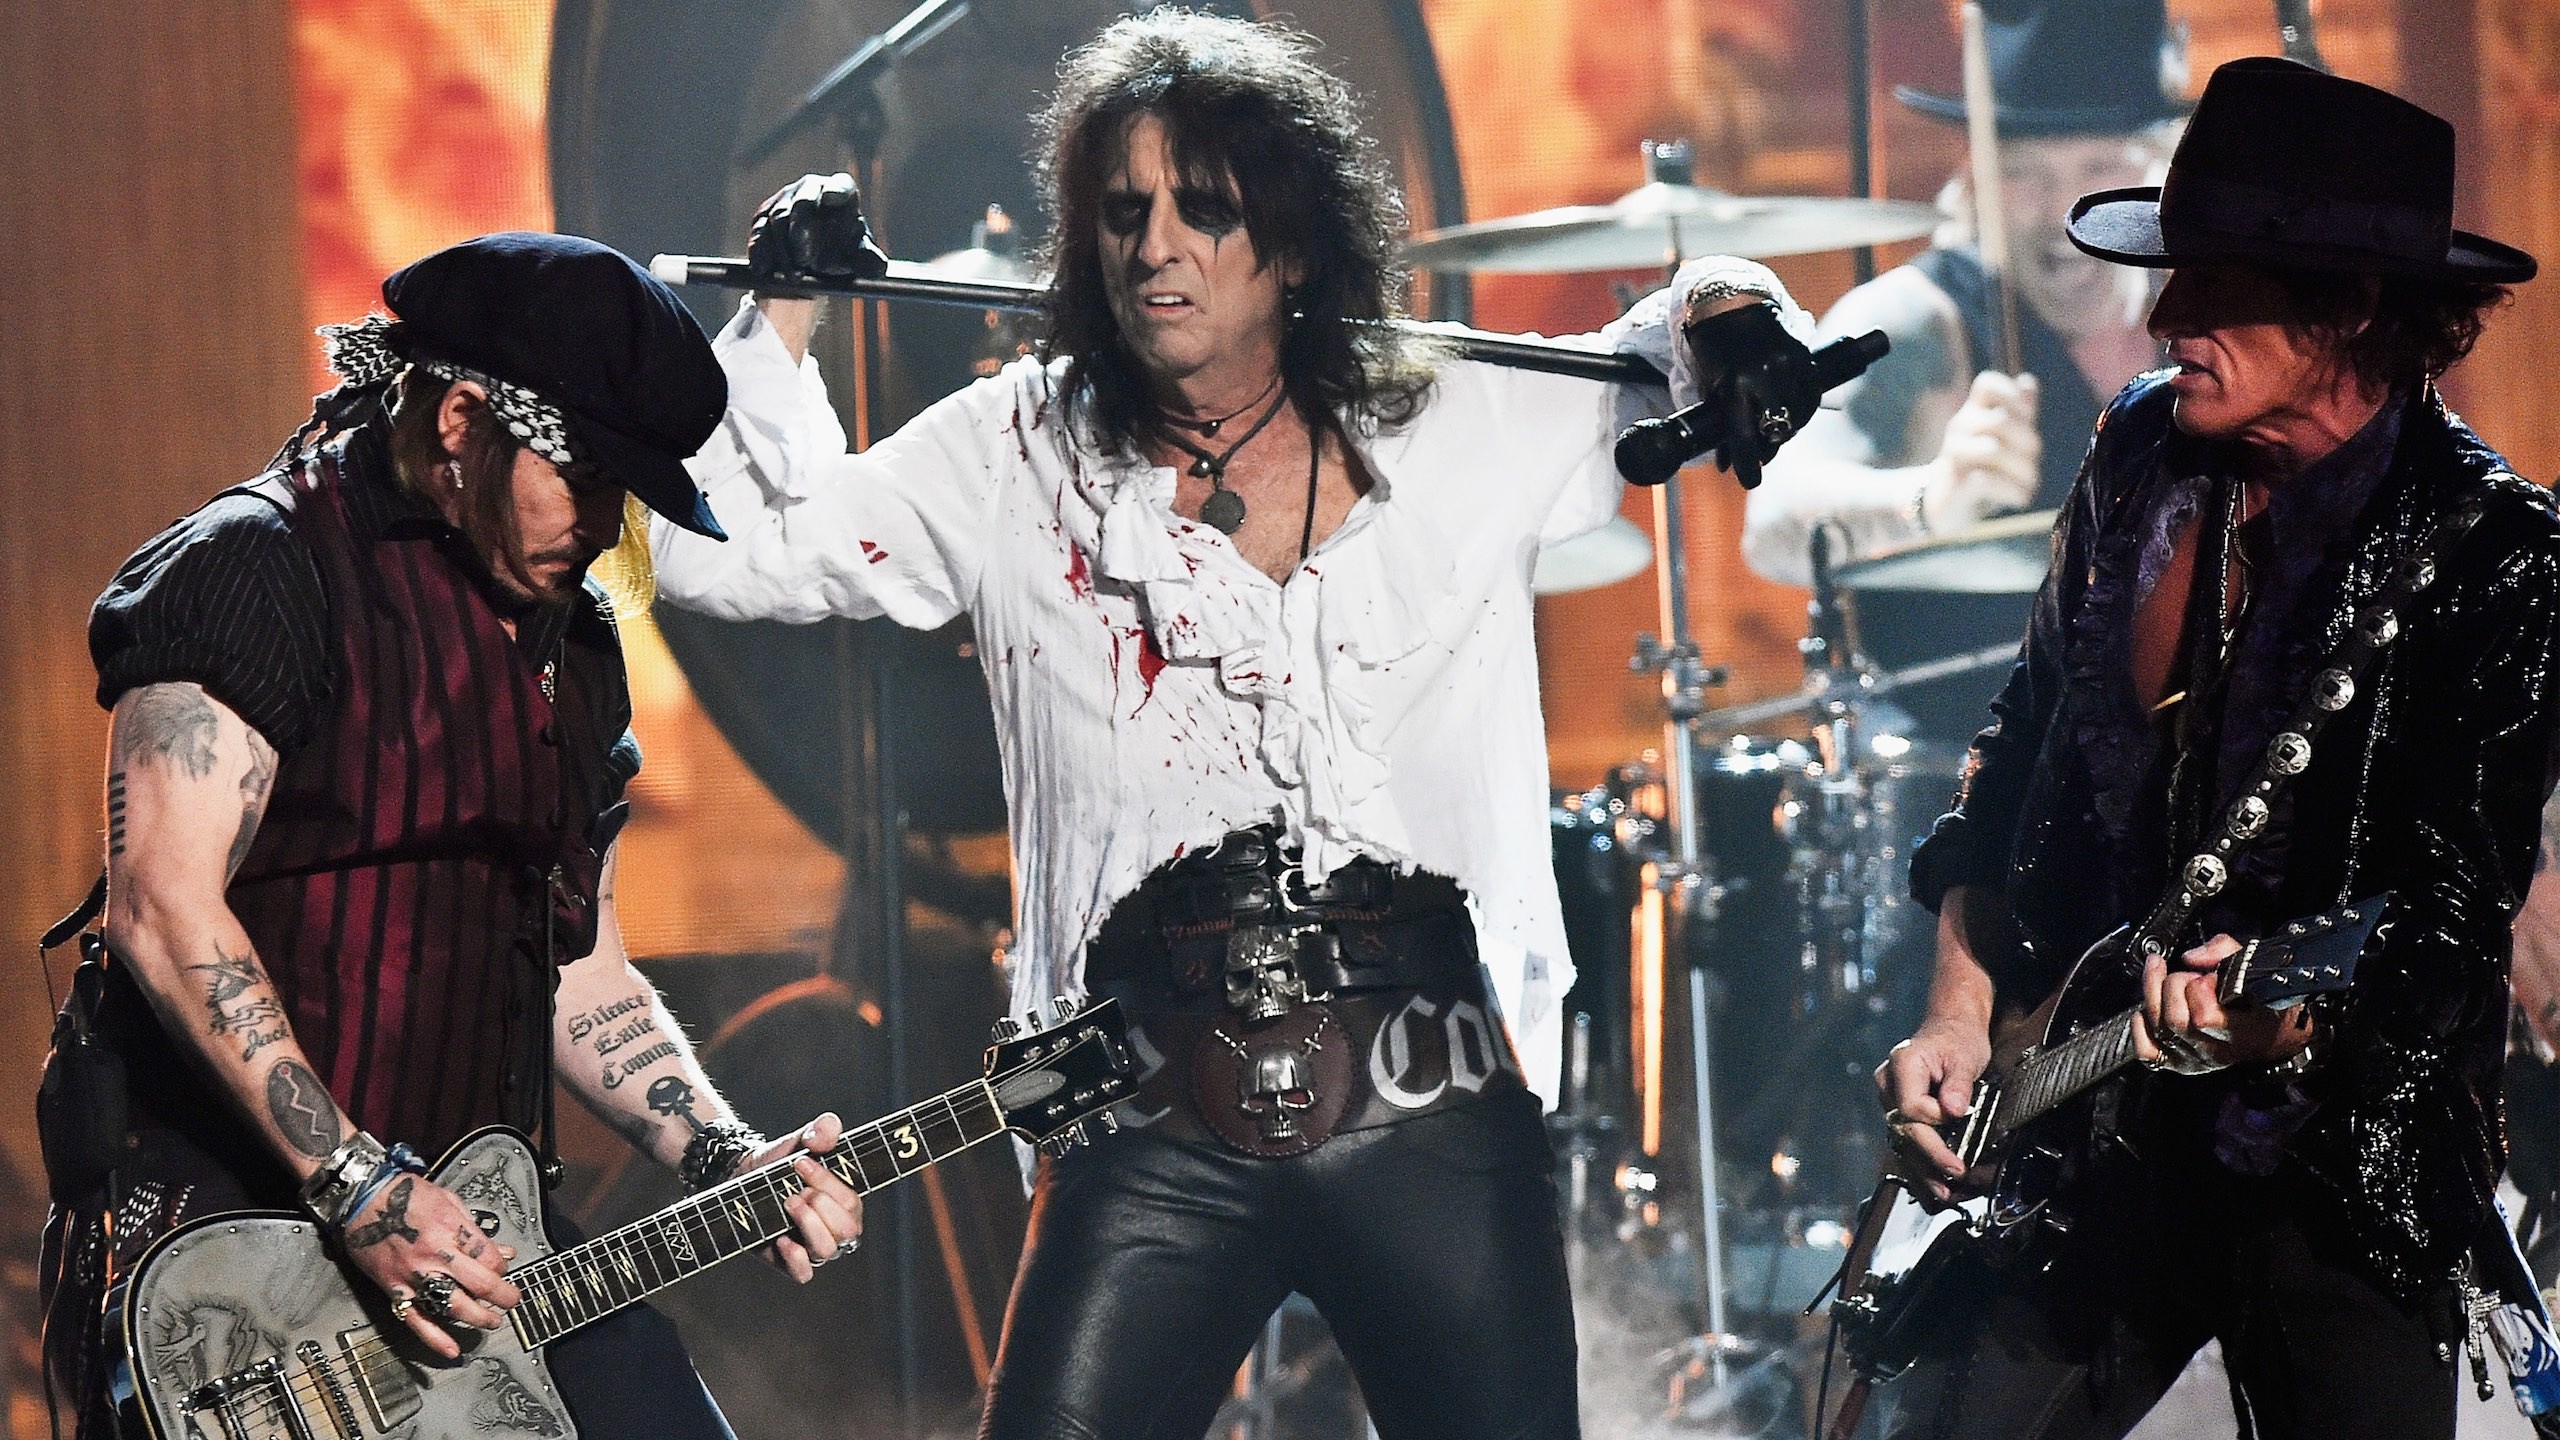 2560x1440 Watch The Hollywood Vampires Honour MotÃ¶rhead's Lemmy Kilmister With 'Ace  Of Spades' Cover At The Grammys - Music Feeds